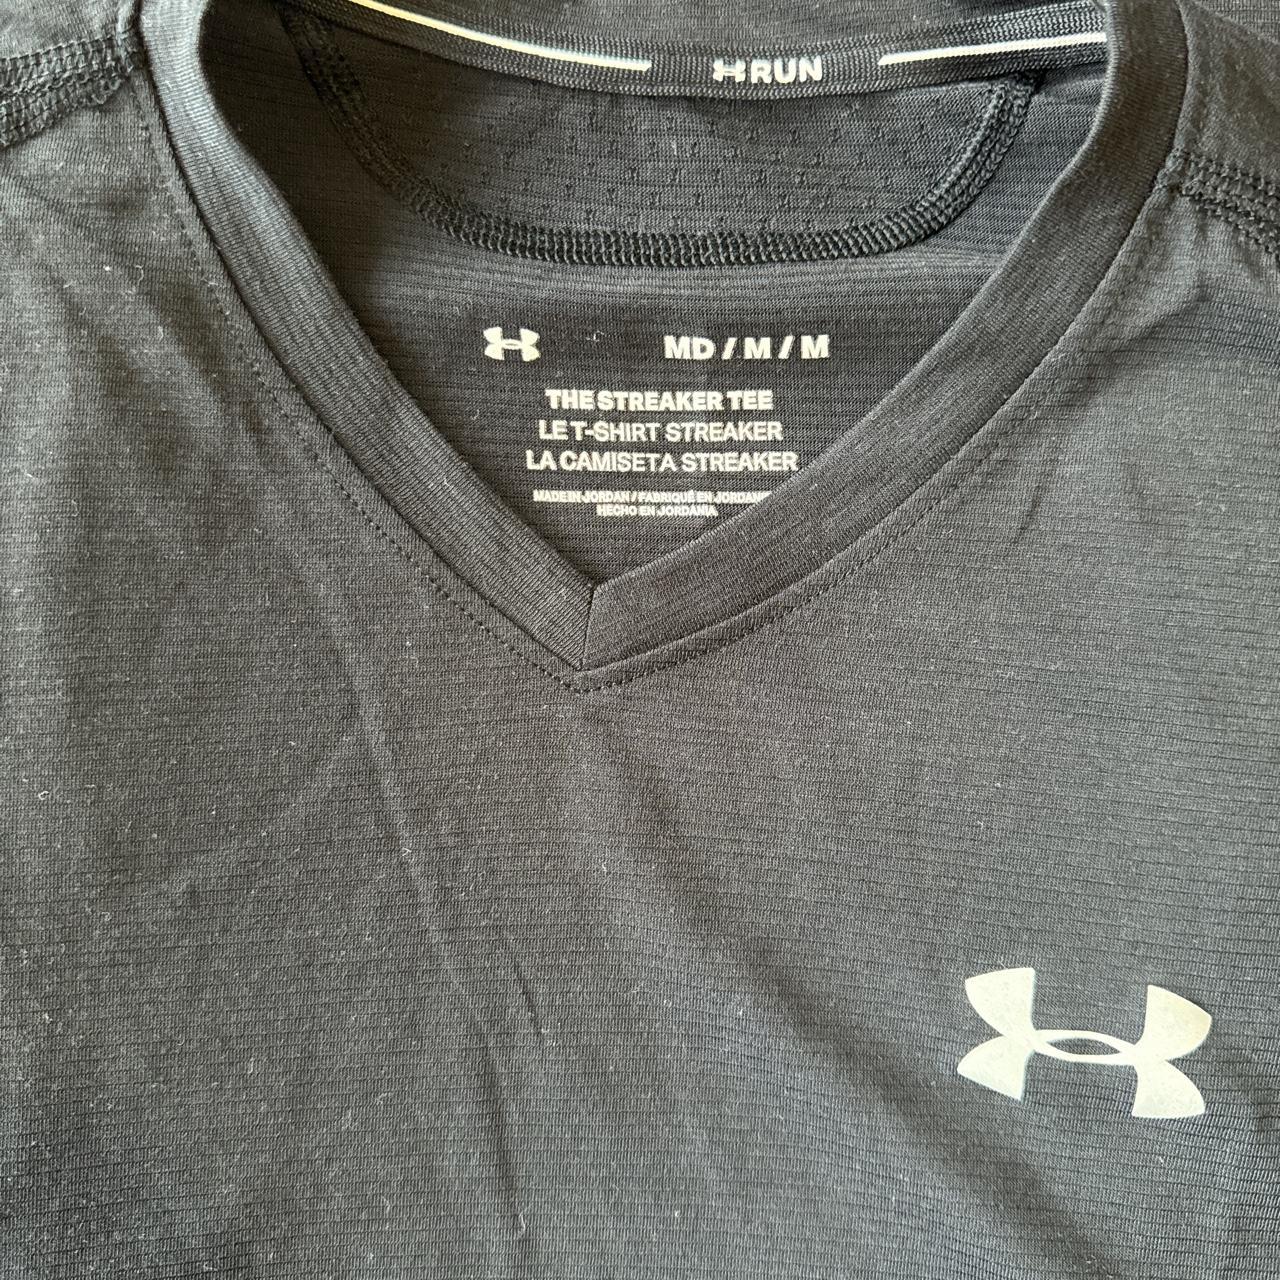 Fitted Under Armour v-neck tshirt. “The Streaker - Depop